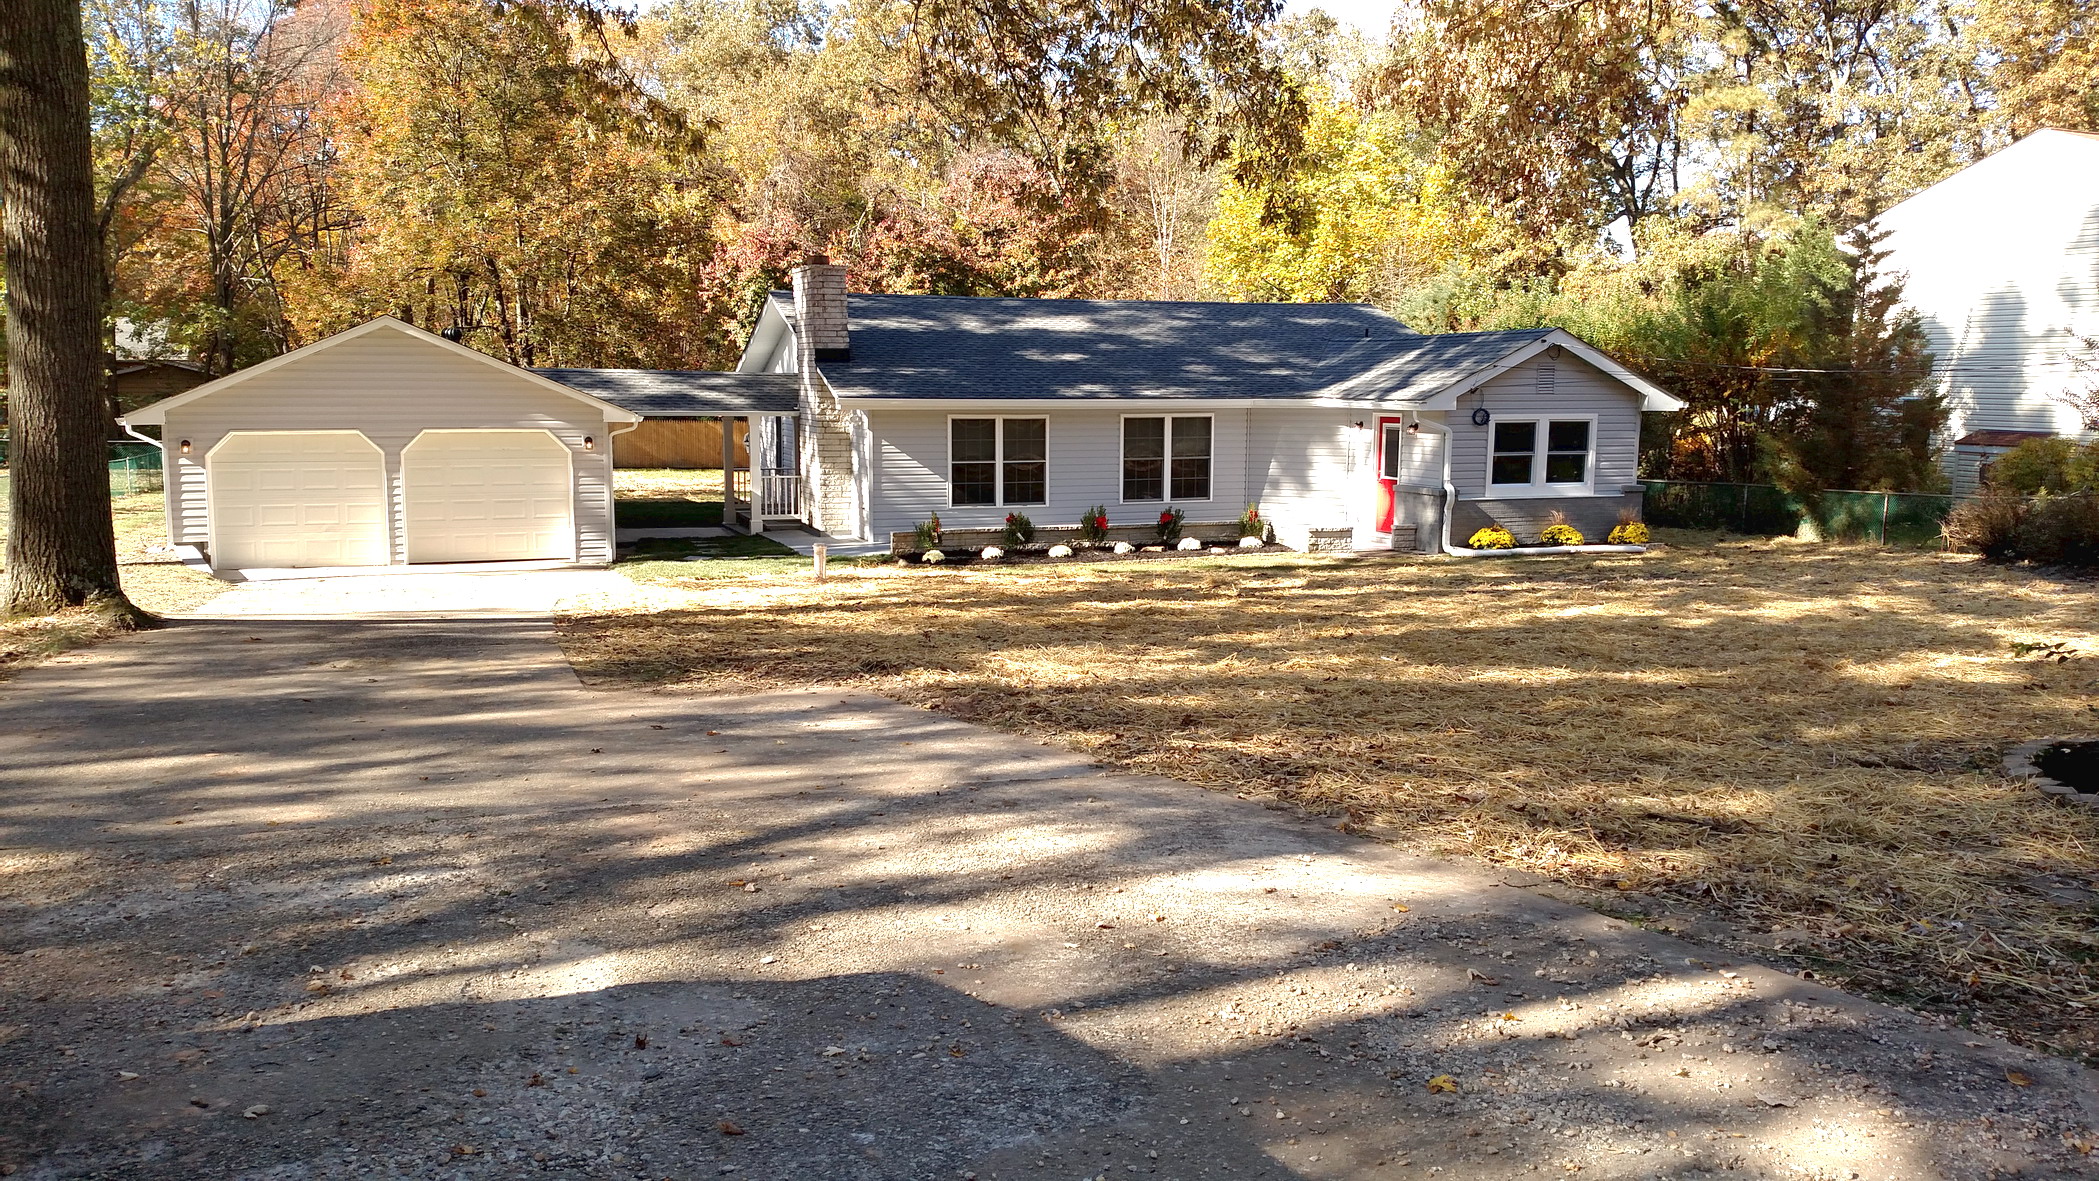 2016 11 08 8342 Elm Rd Front Of House 6